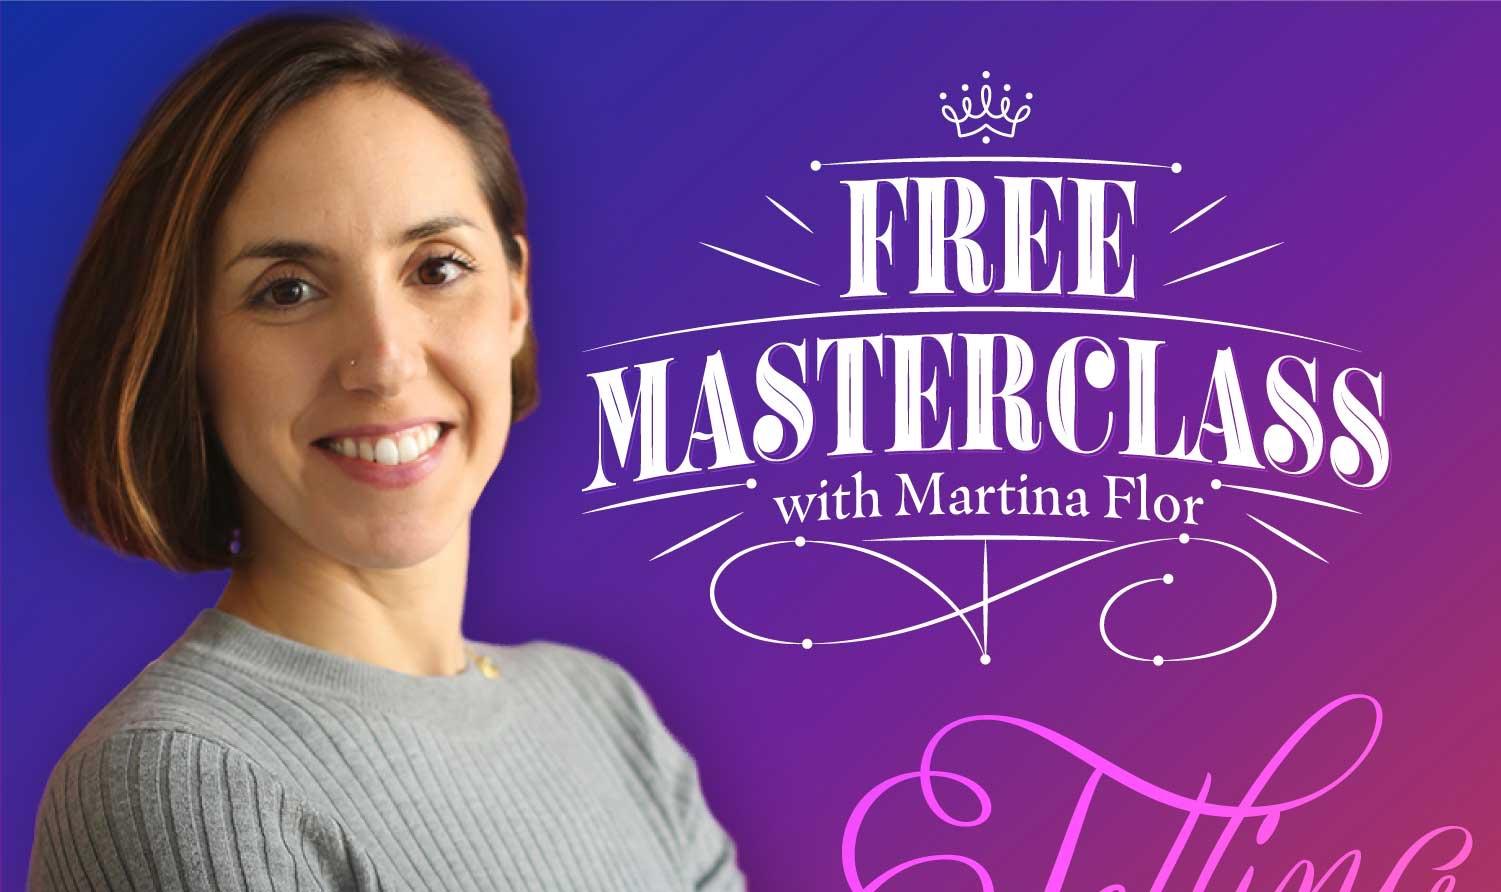 More information about "Free lettering master class with Martina Flor"